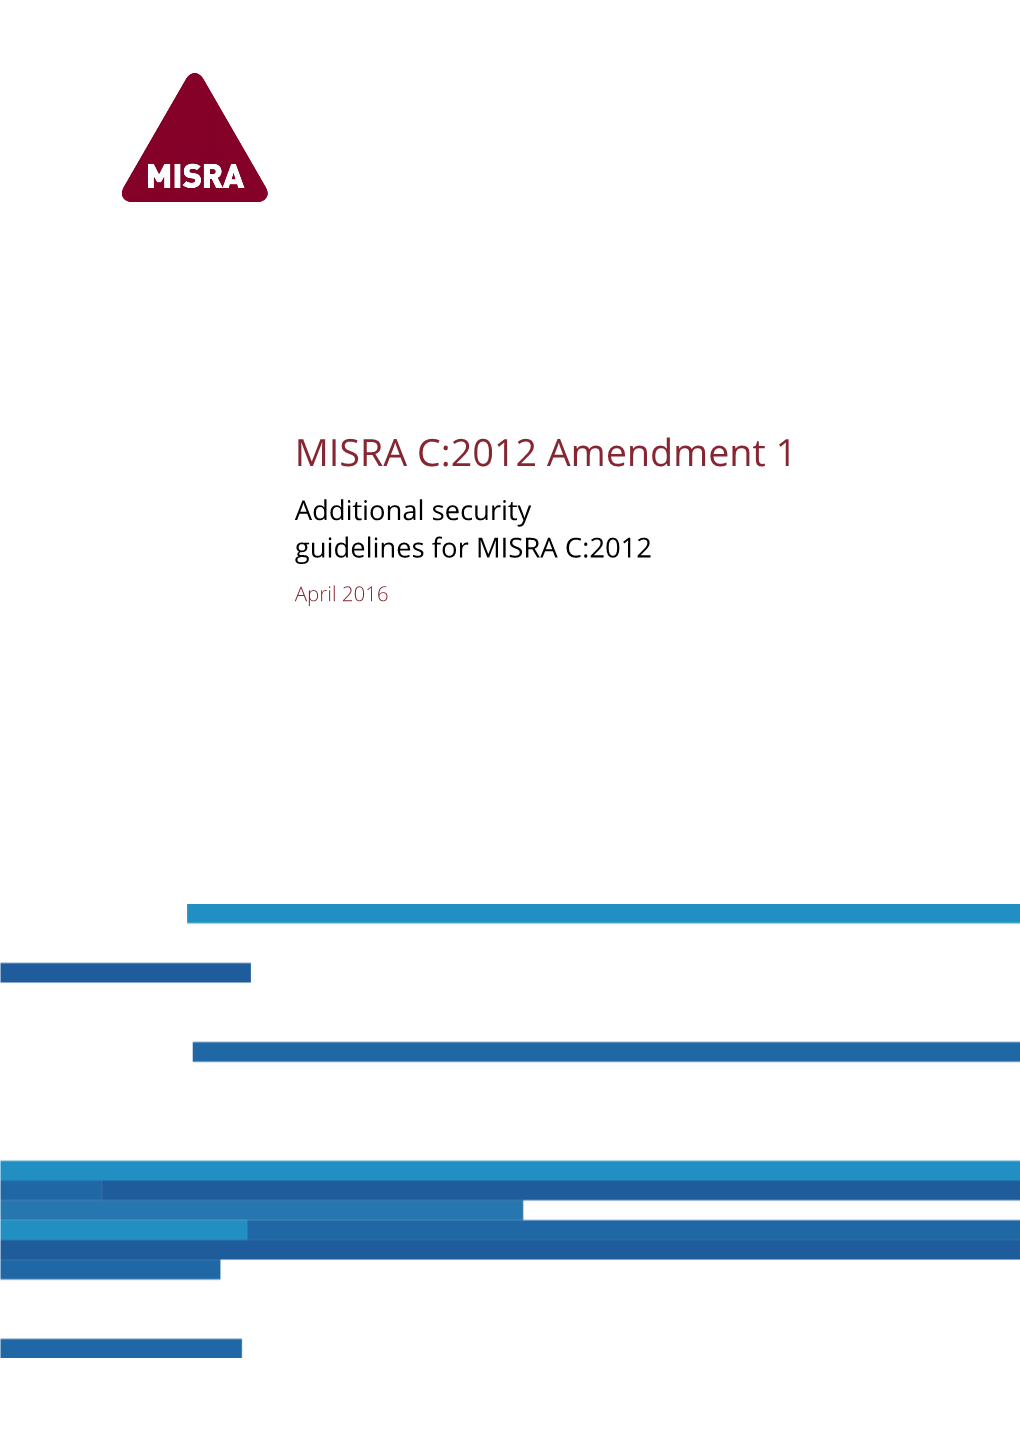 Amendment 1: Additional Security Guidelines for MISRA C:2012